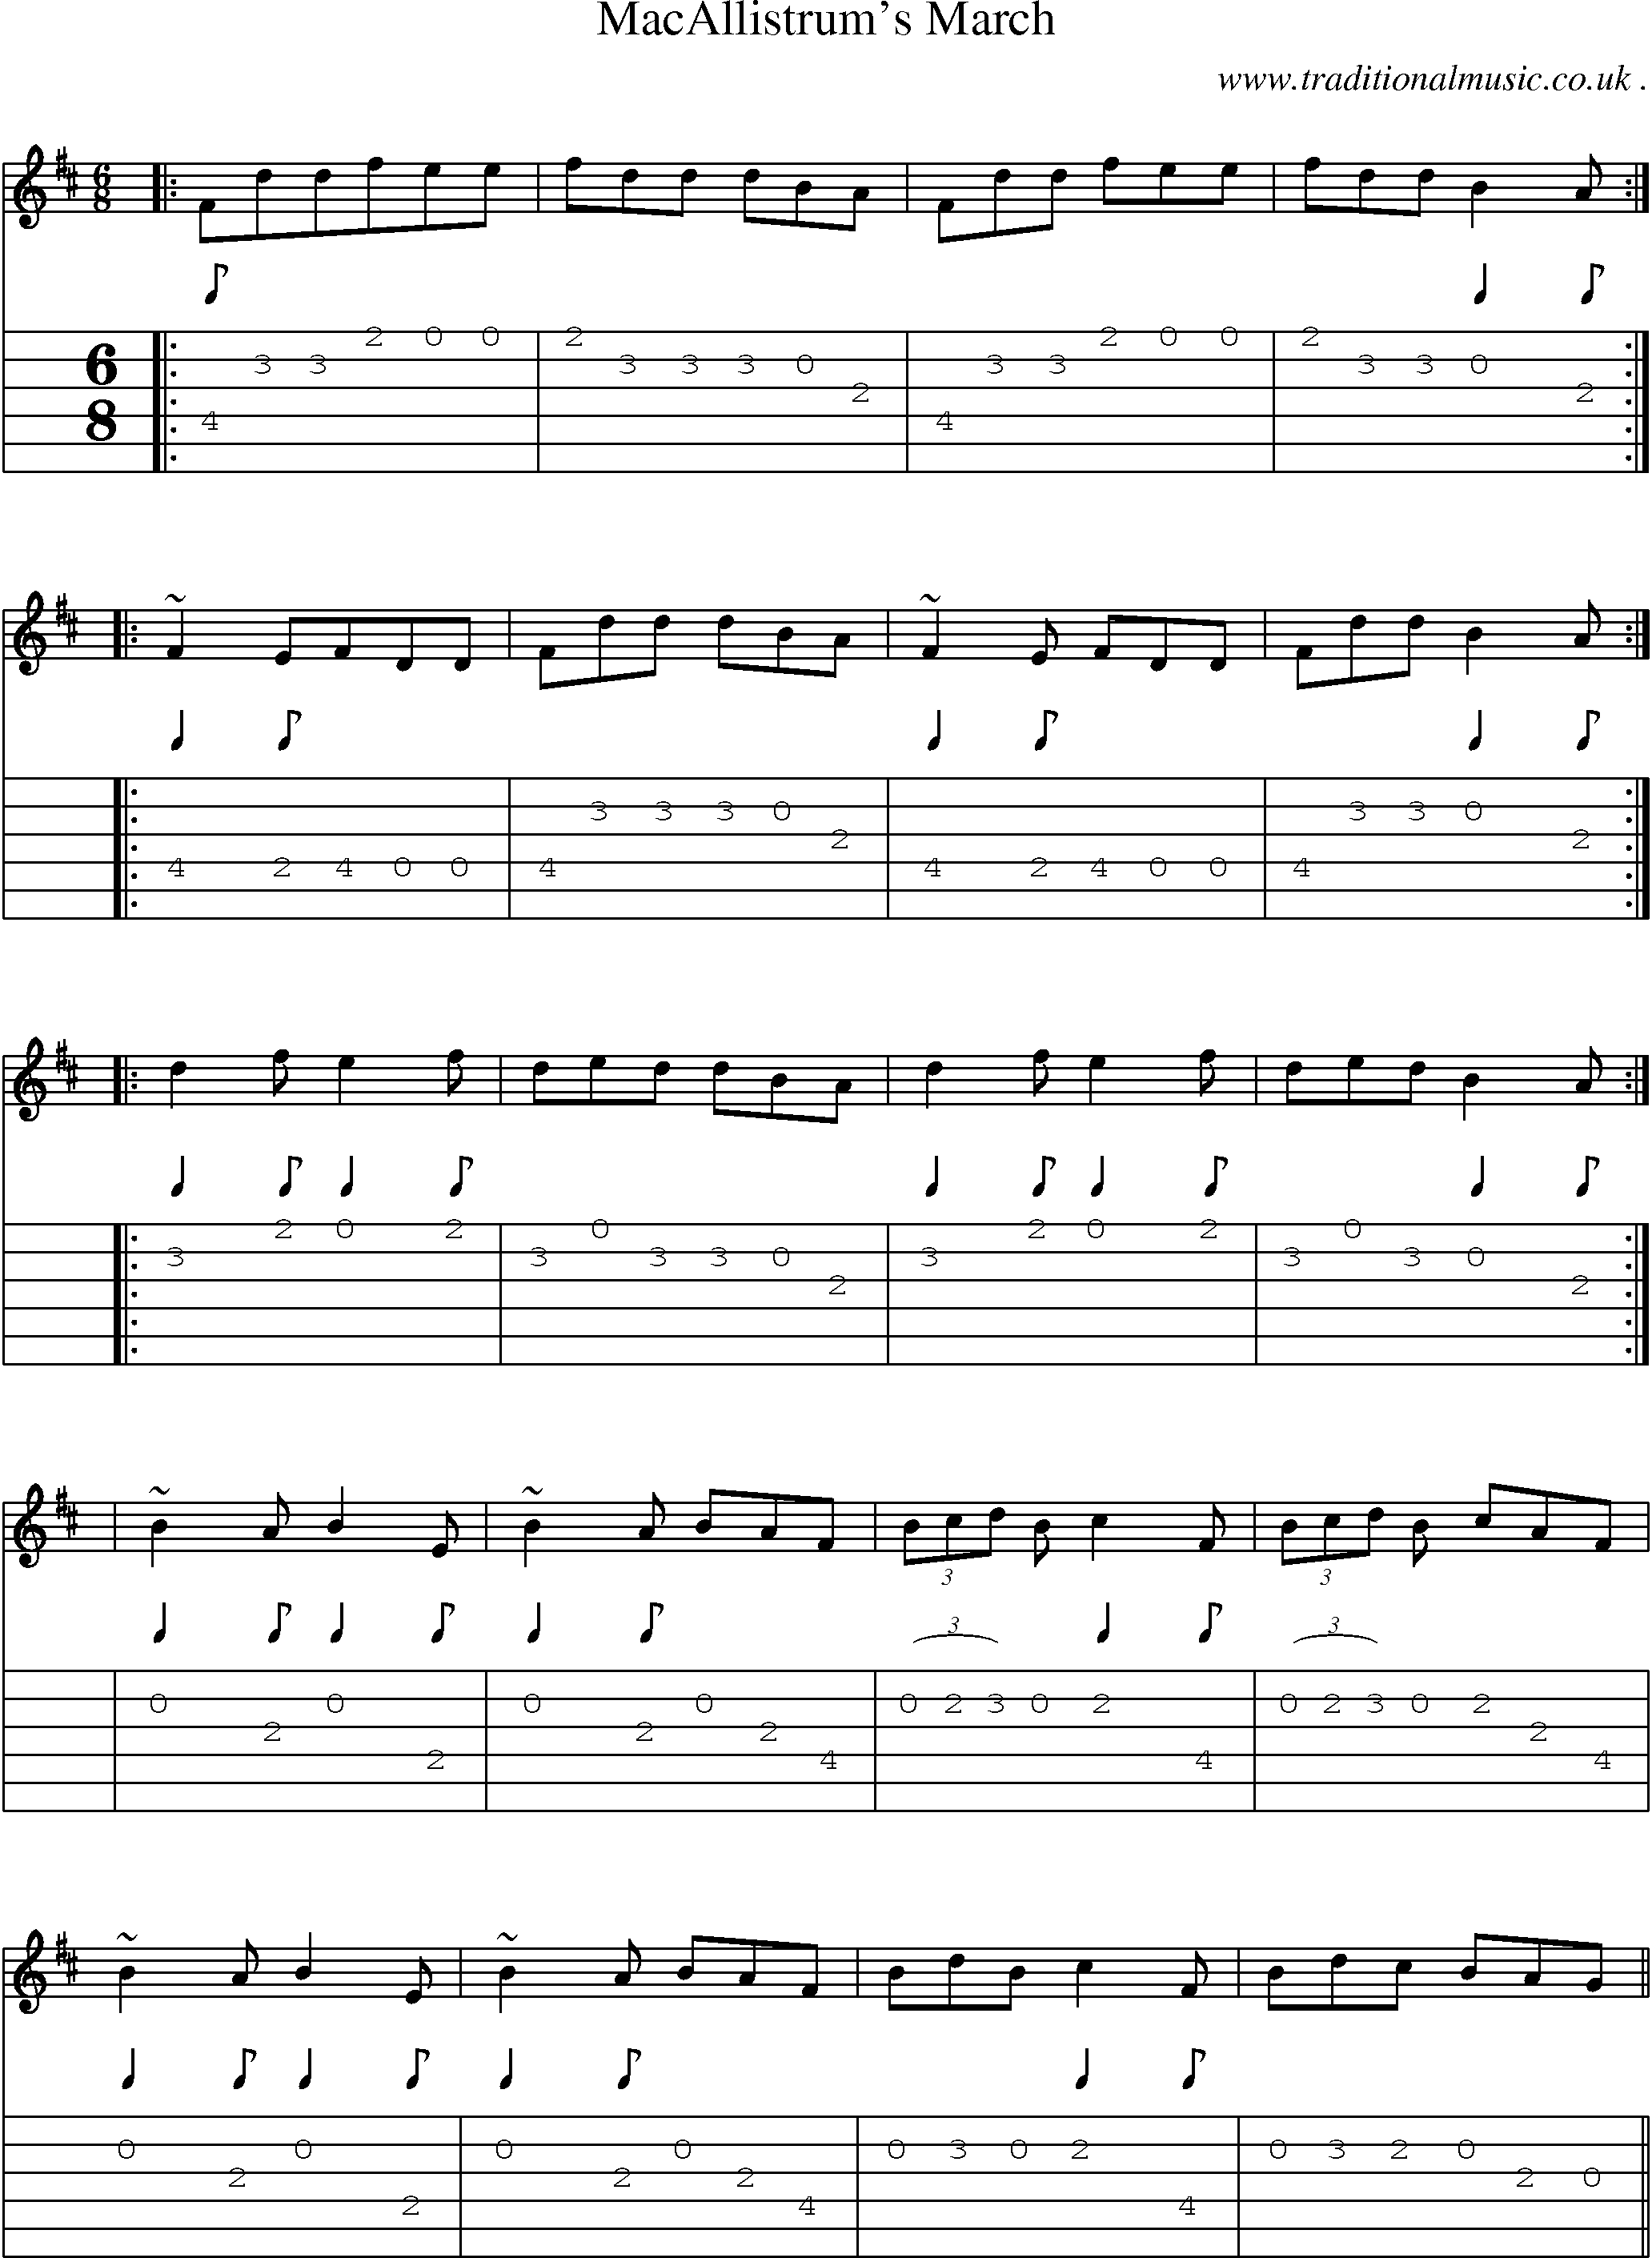 Sheet-music  score, Chords and Guitar Tabs for Macallistrums March